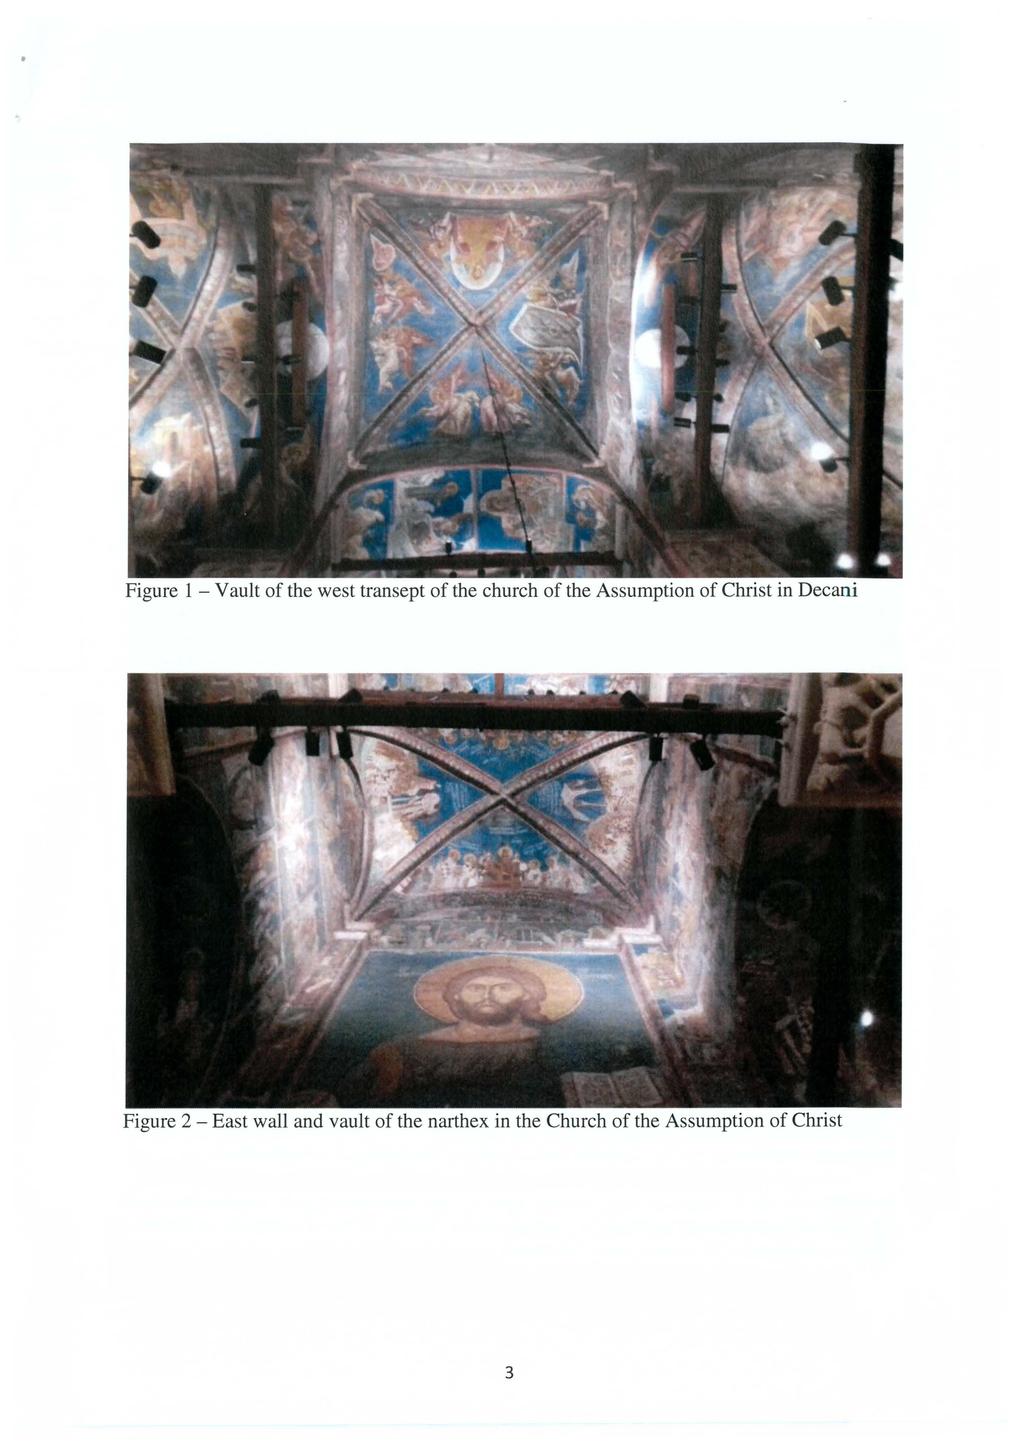 Figure 1 - Vault of the west transept of the church of the Assumption of Christ in Dec